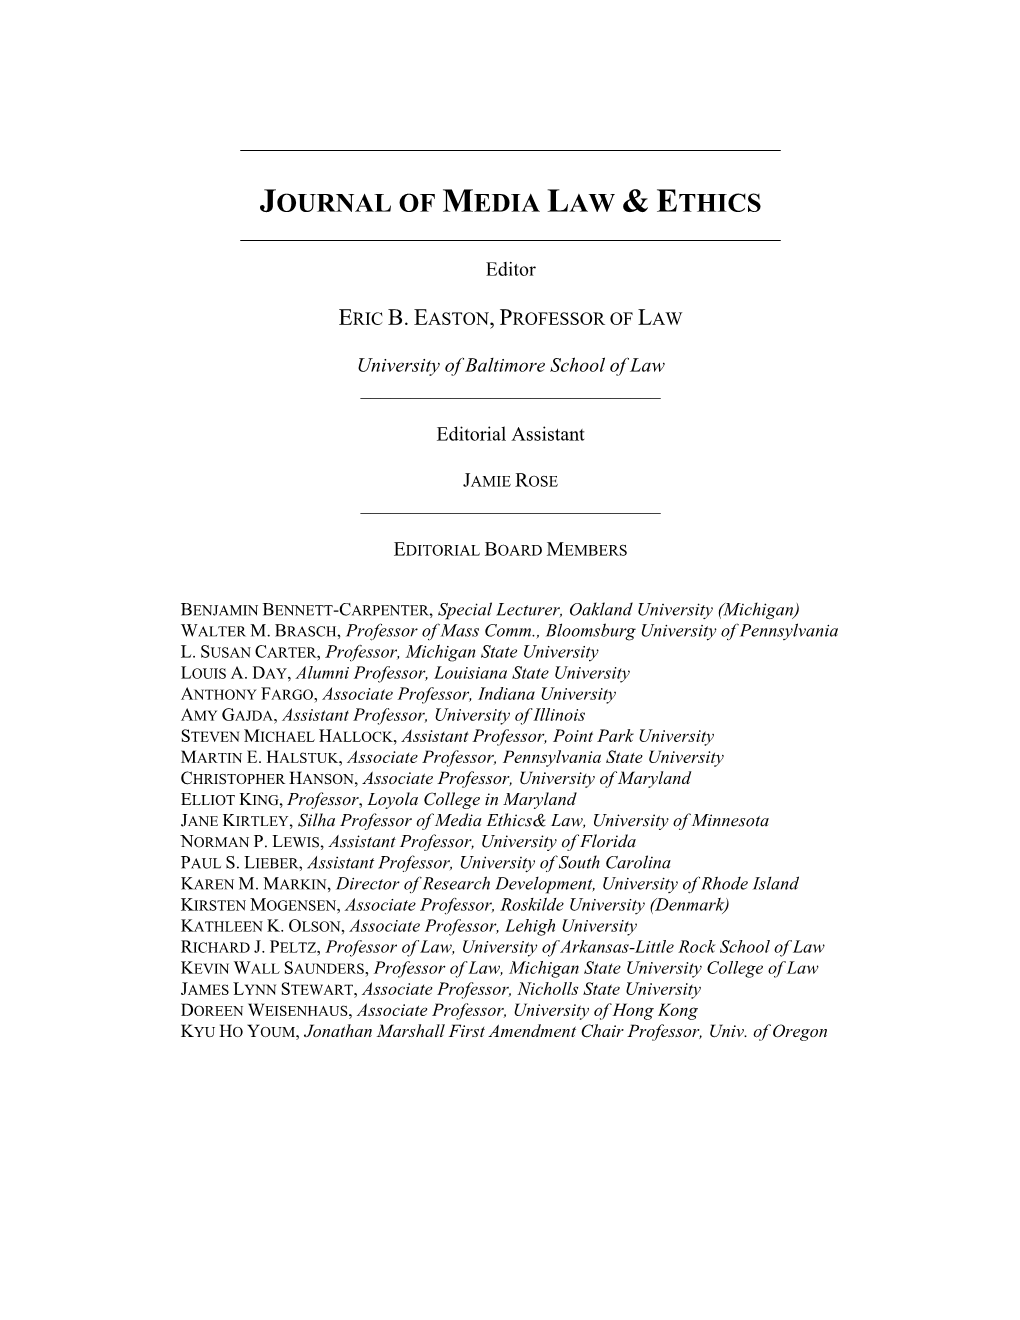 The Aims of Public Scholarship in Media Law and Ethics